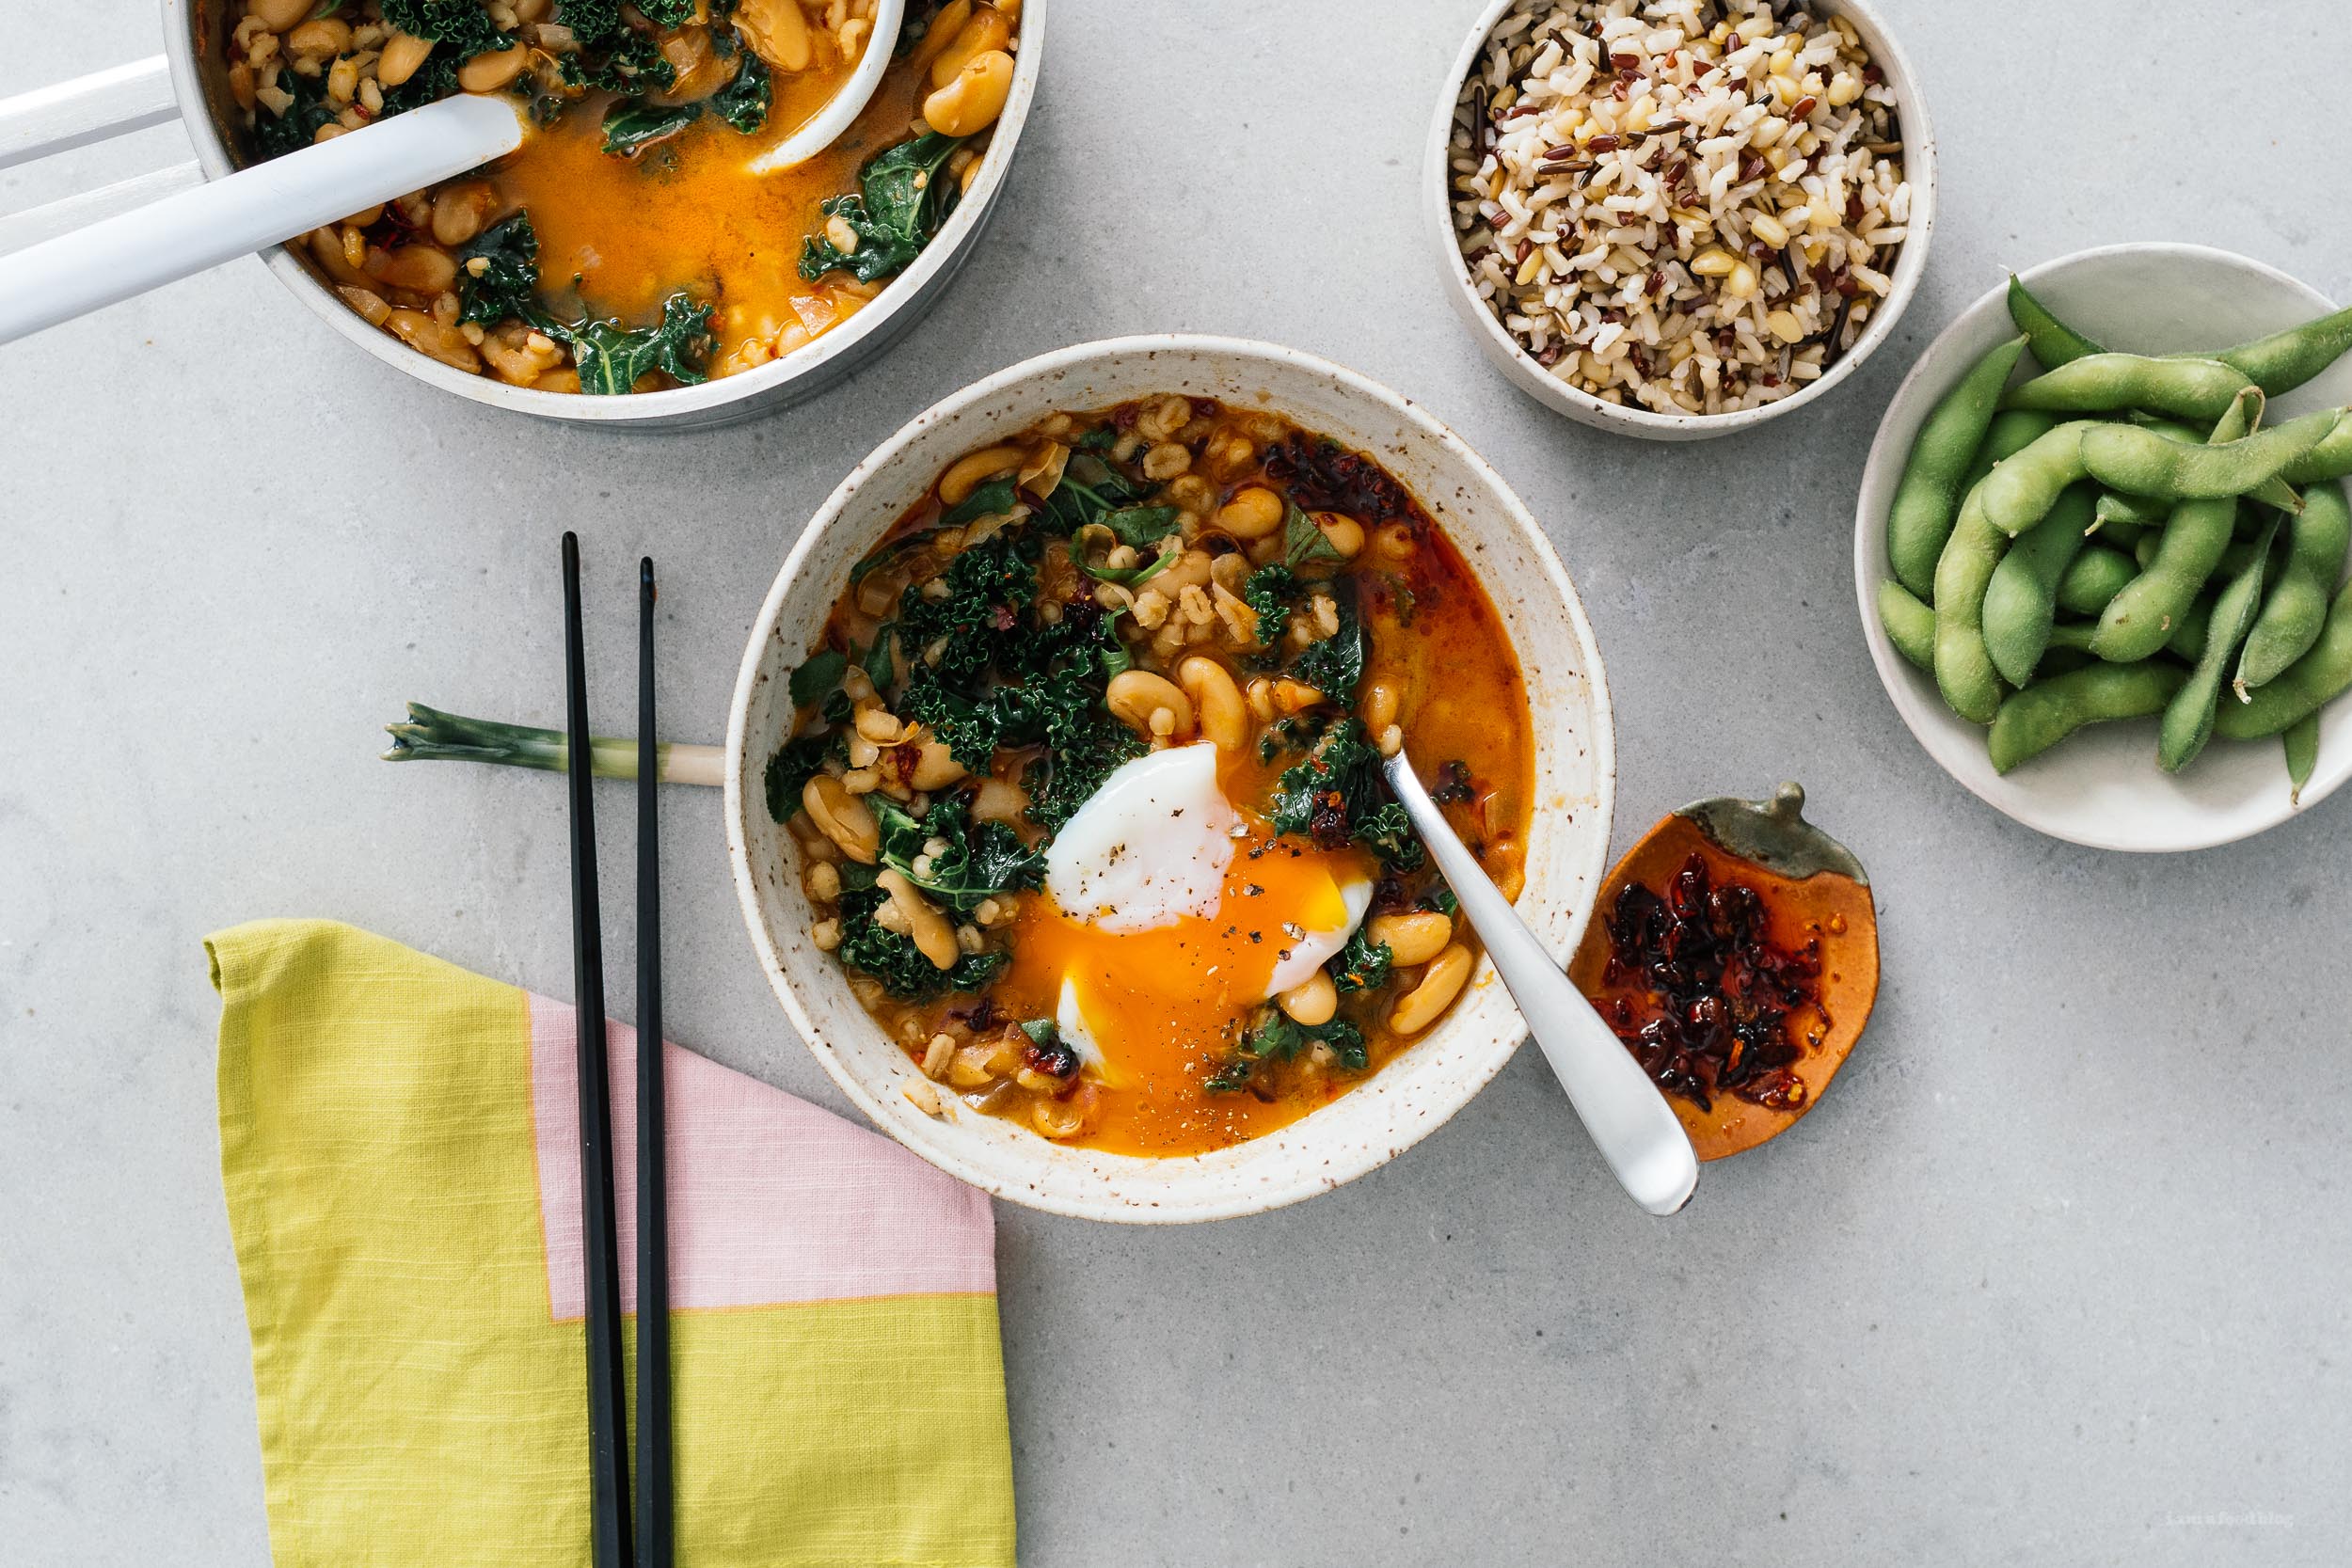 Spicy Chili Crisp White Bean and Barley Stew with Kale and Eggs